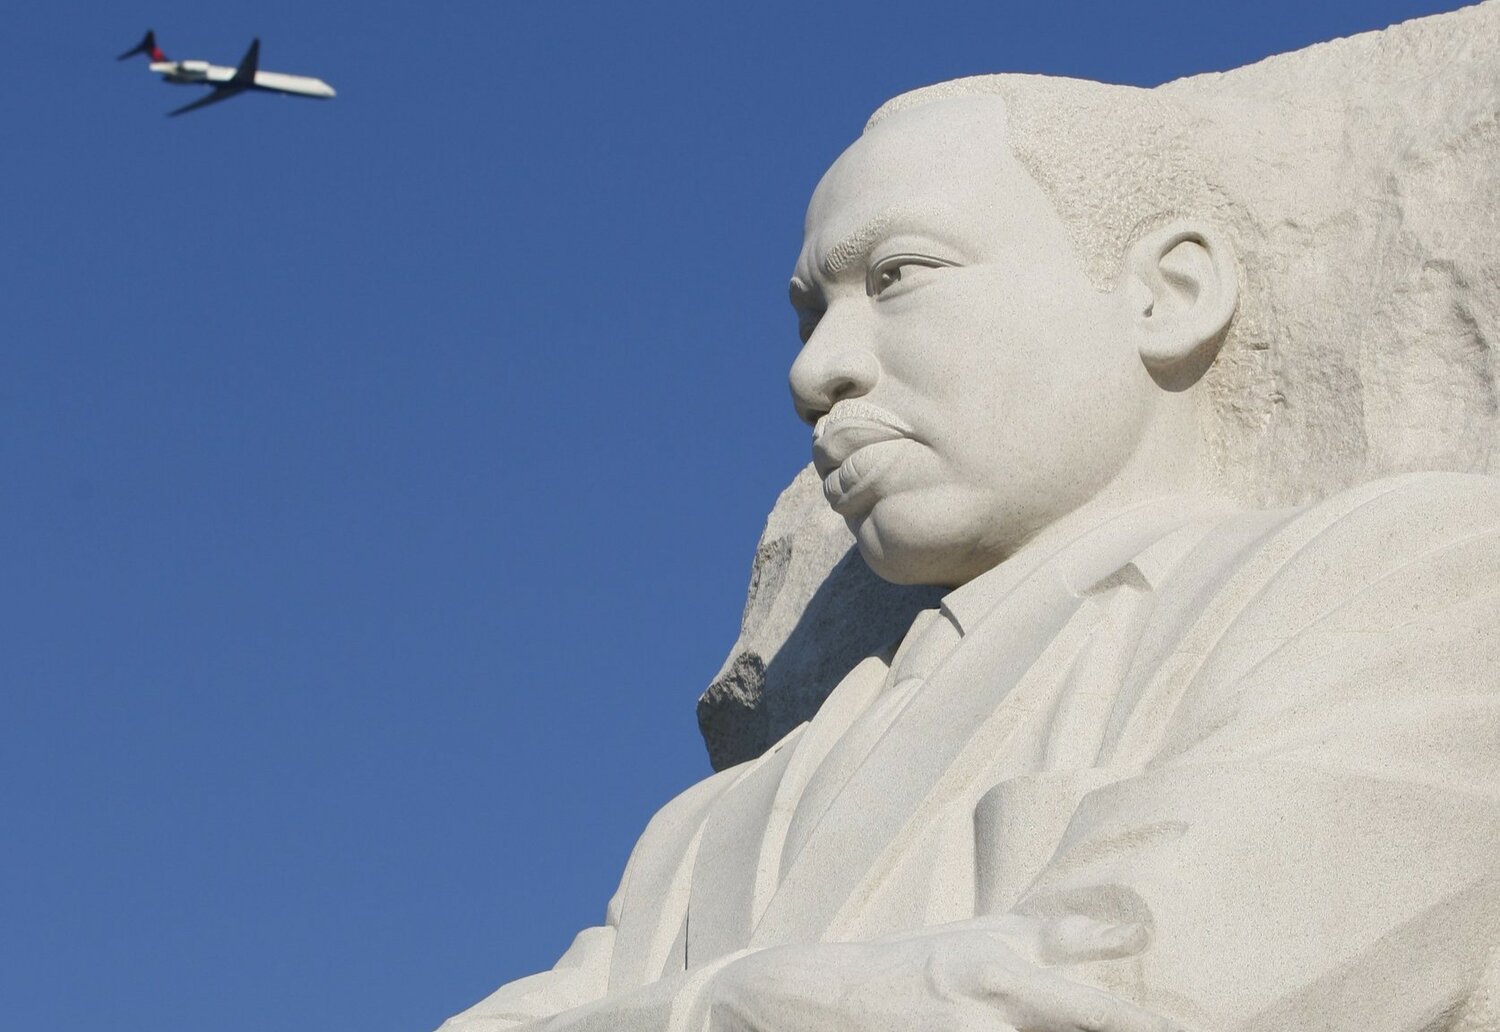 A plane flies over a 30-foot sculpture of Dr. Martin Luther King Jr. on the National Mall in Washington Aug. 22, 2011, the year it opened. As the nation celebrates the legacy of Dr. Martin Luther King Jr. on Jan. 15, 2024, both personal conversion and action are needed to build what the slain civil rights leader called “the beloved community,” say Catholic clergy and lay leaders.